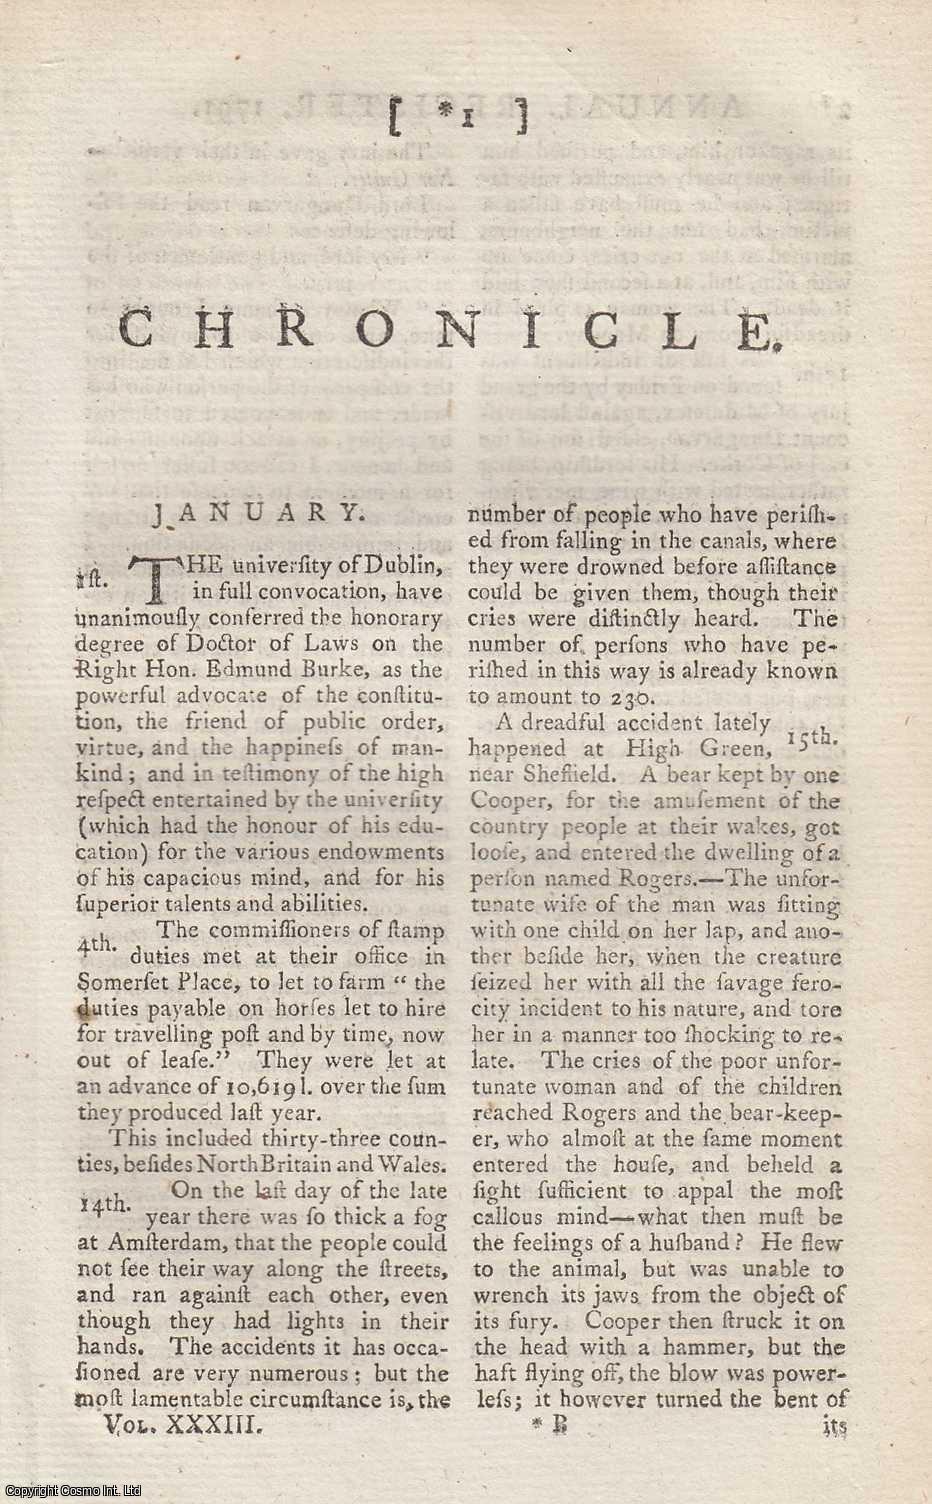 Annual Register - Chronicle for the year 1791. An original article from The Annual Register for 1791.